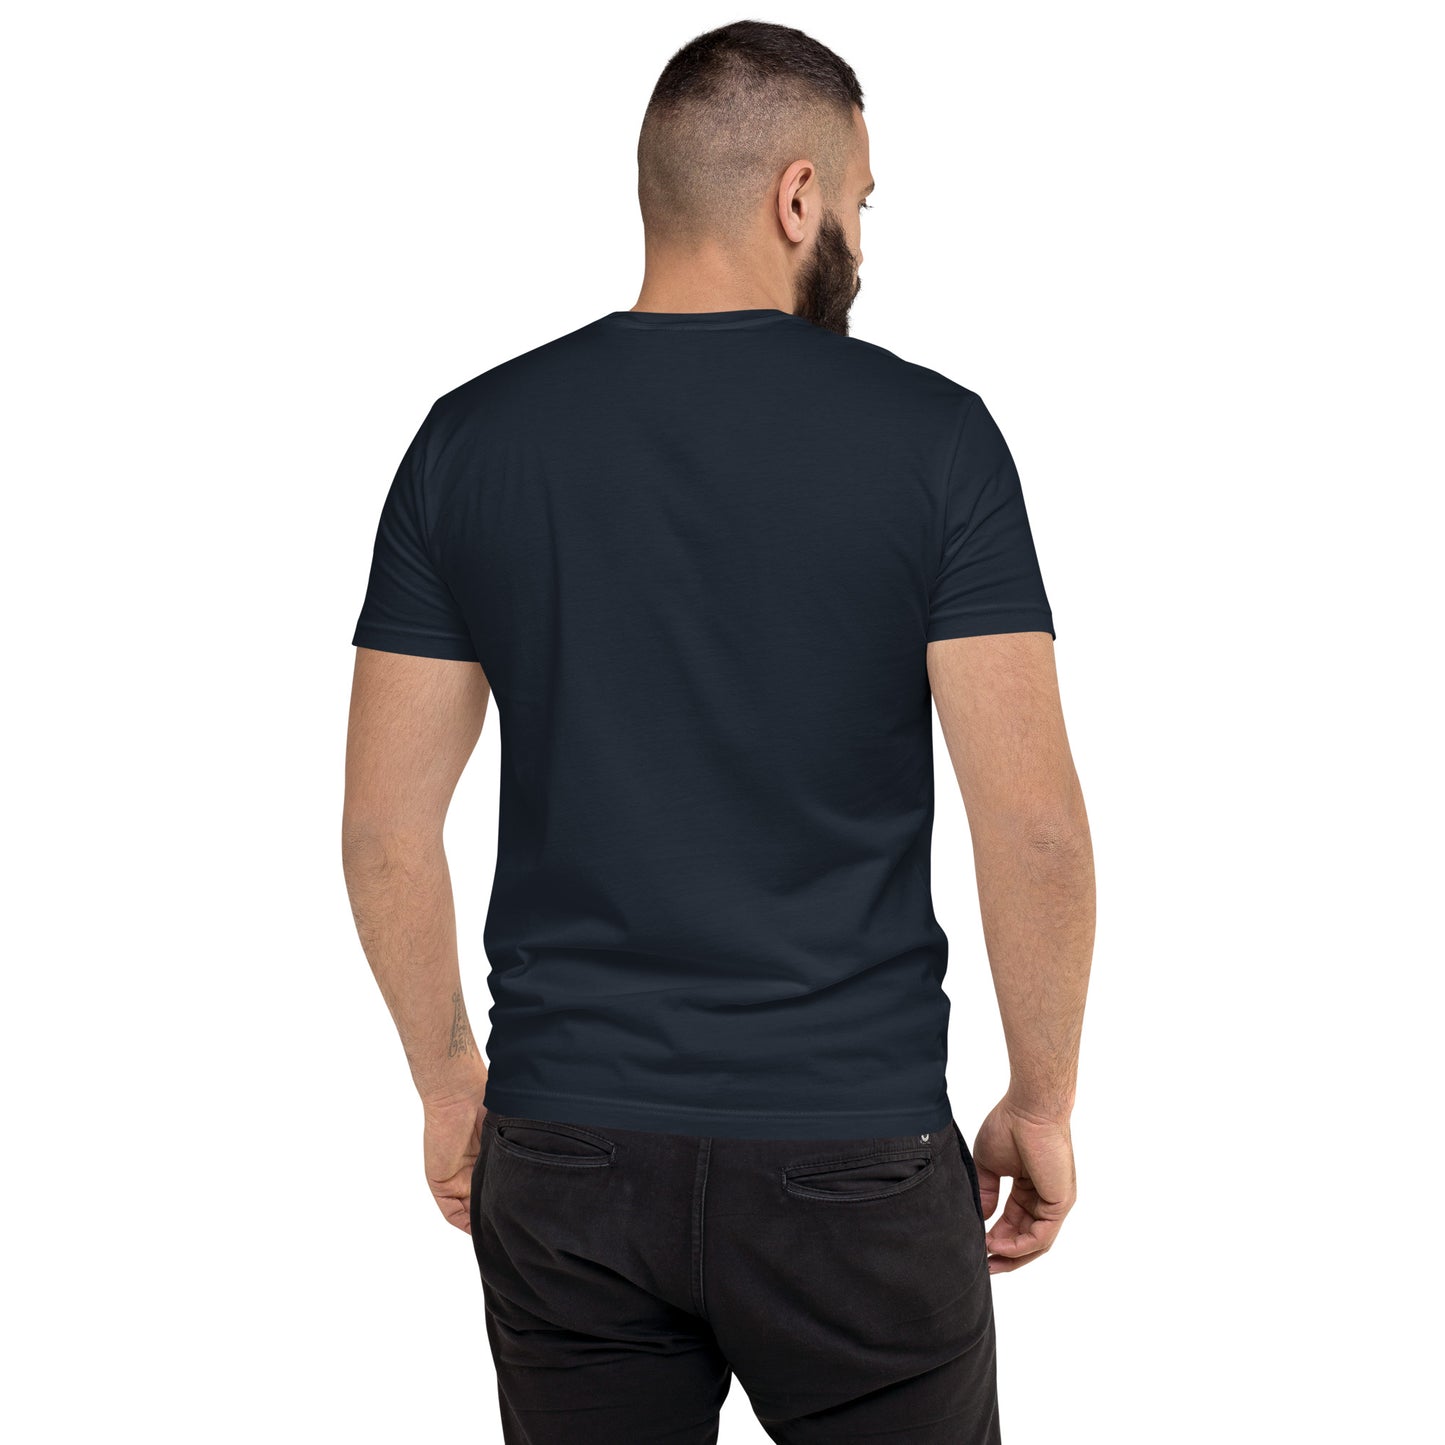 Time To Sit Black Short Sleeve T-shirt